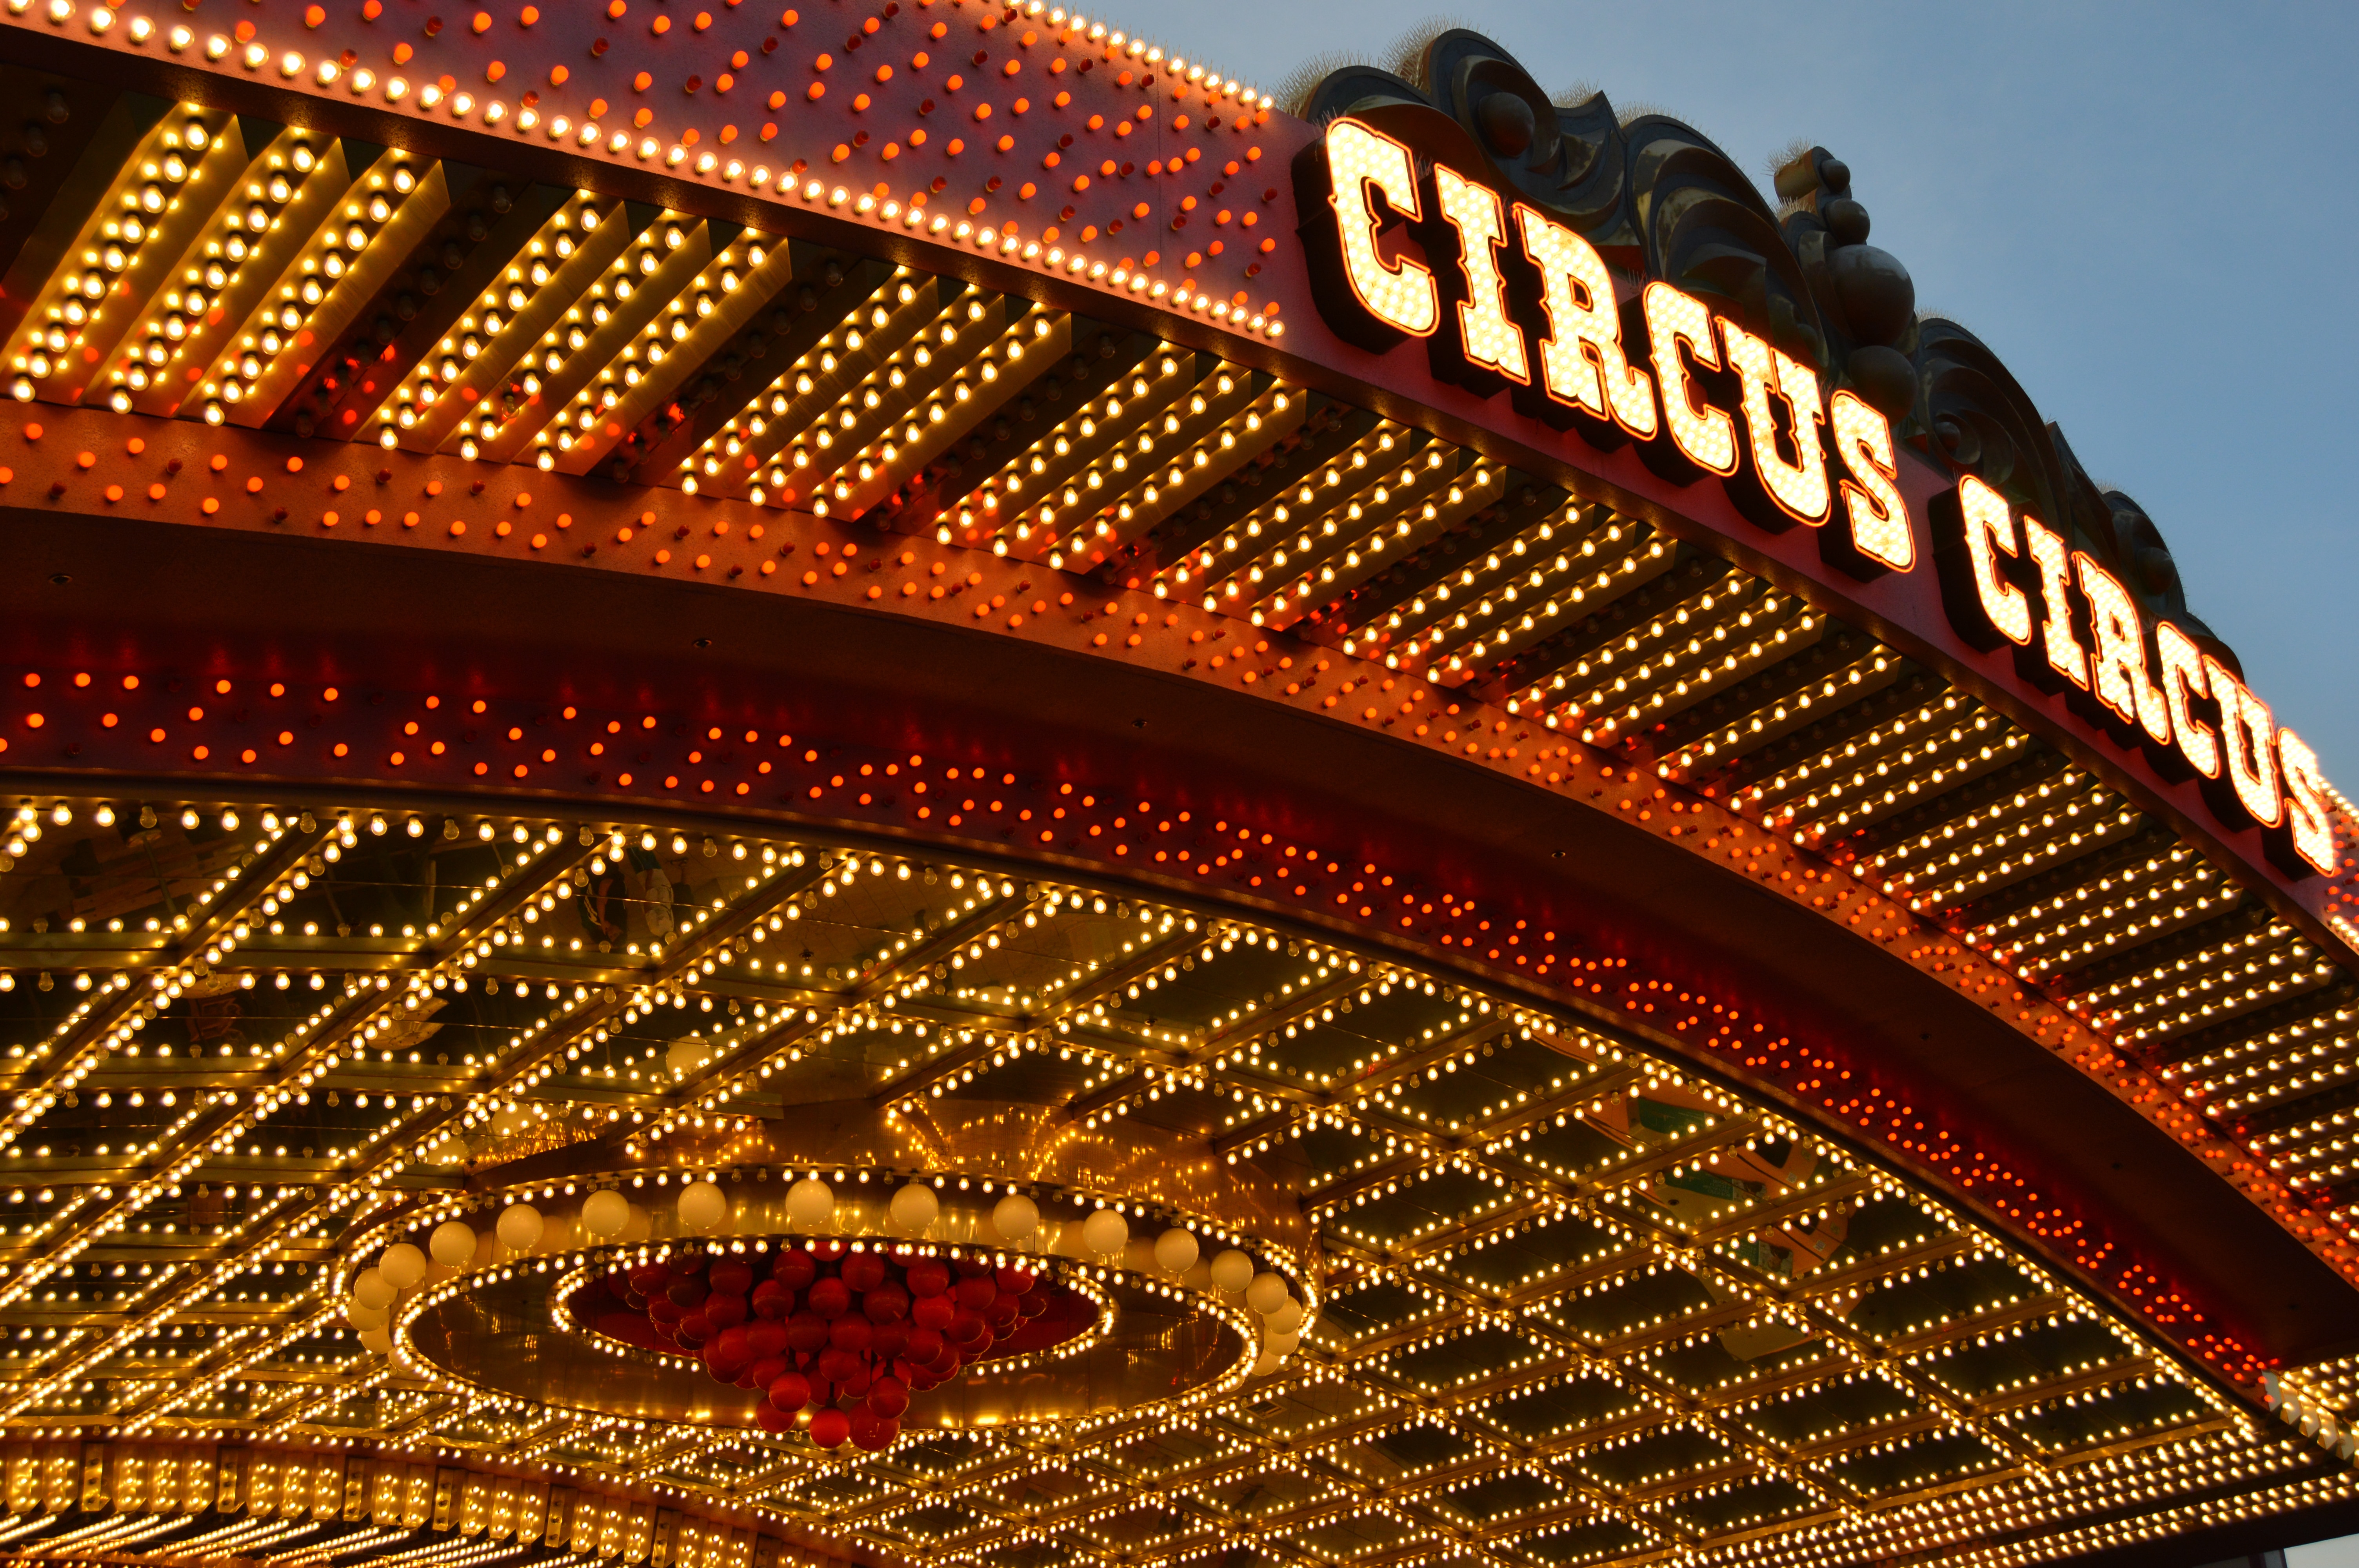 circus circus led lighted signage under blue sky